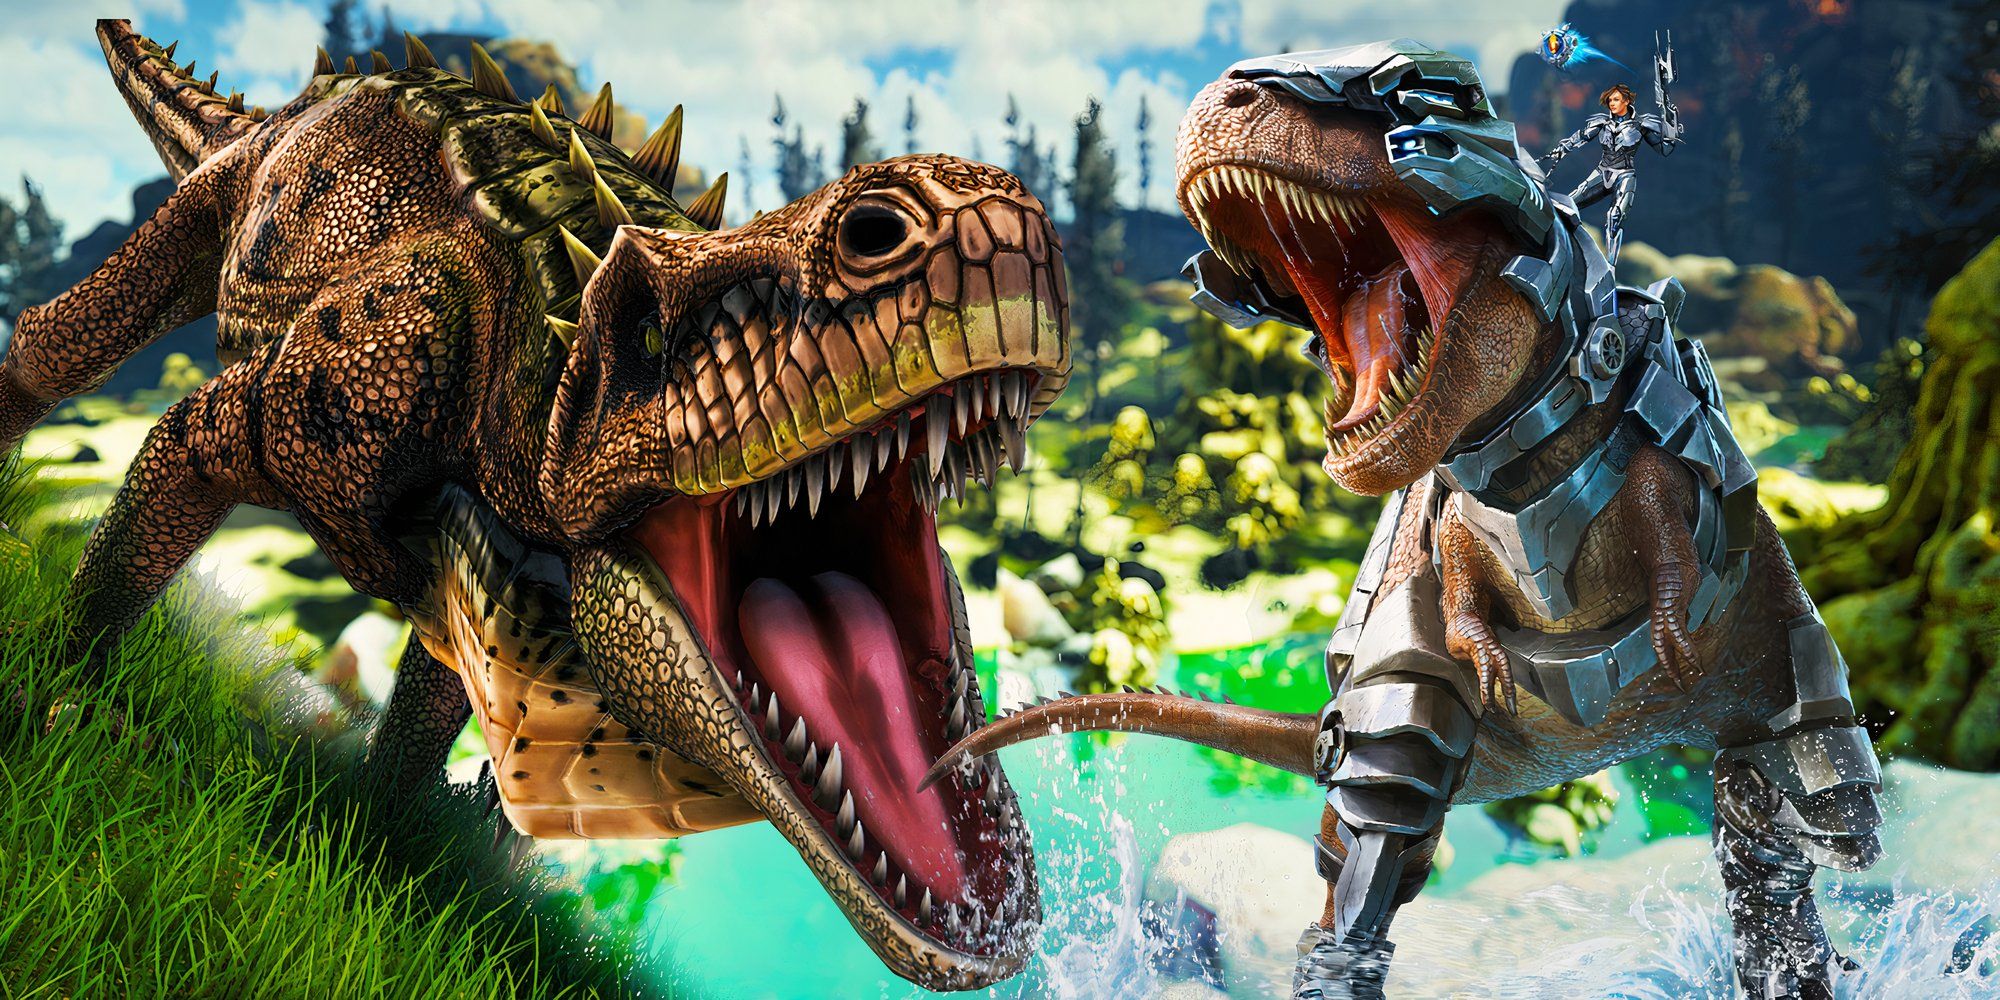 A roaring dinosaur and an armored dino splashing in a pond in art from Ark: Survival Ascended.